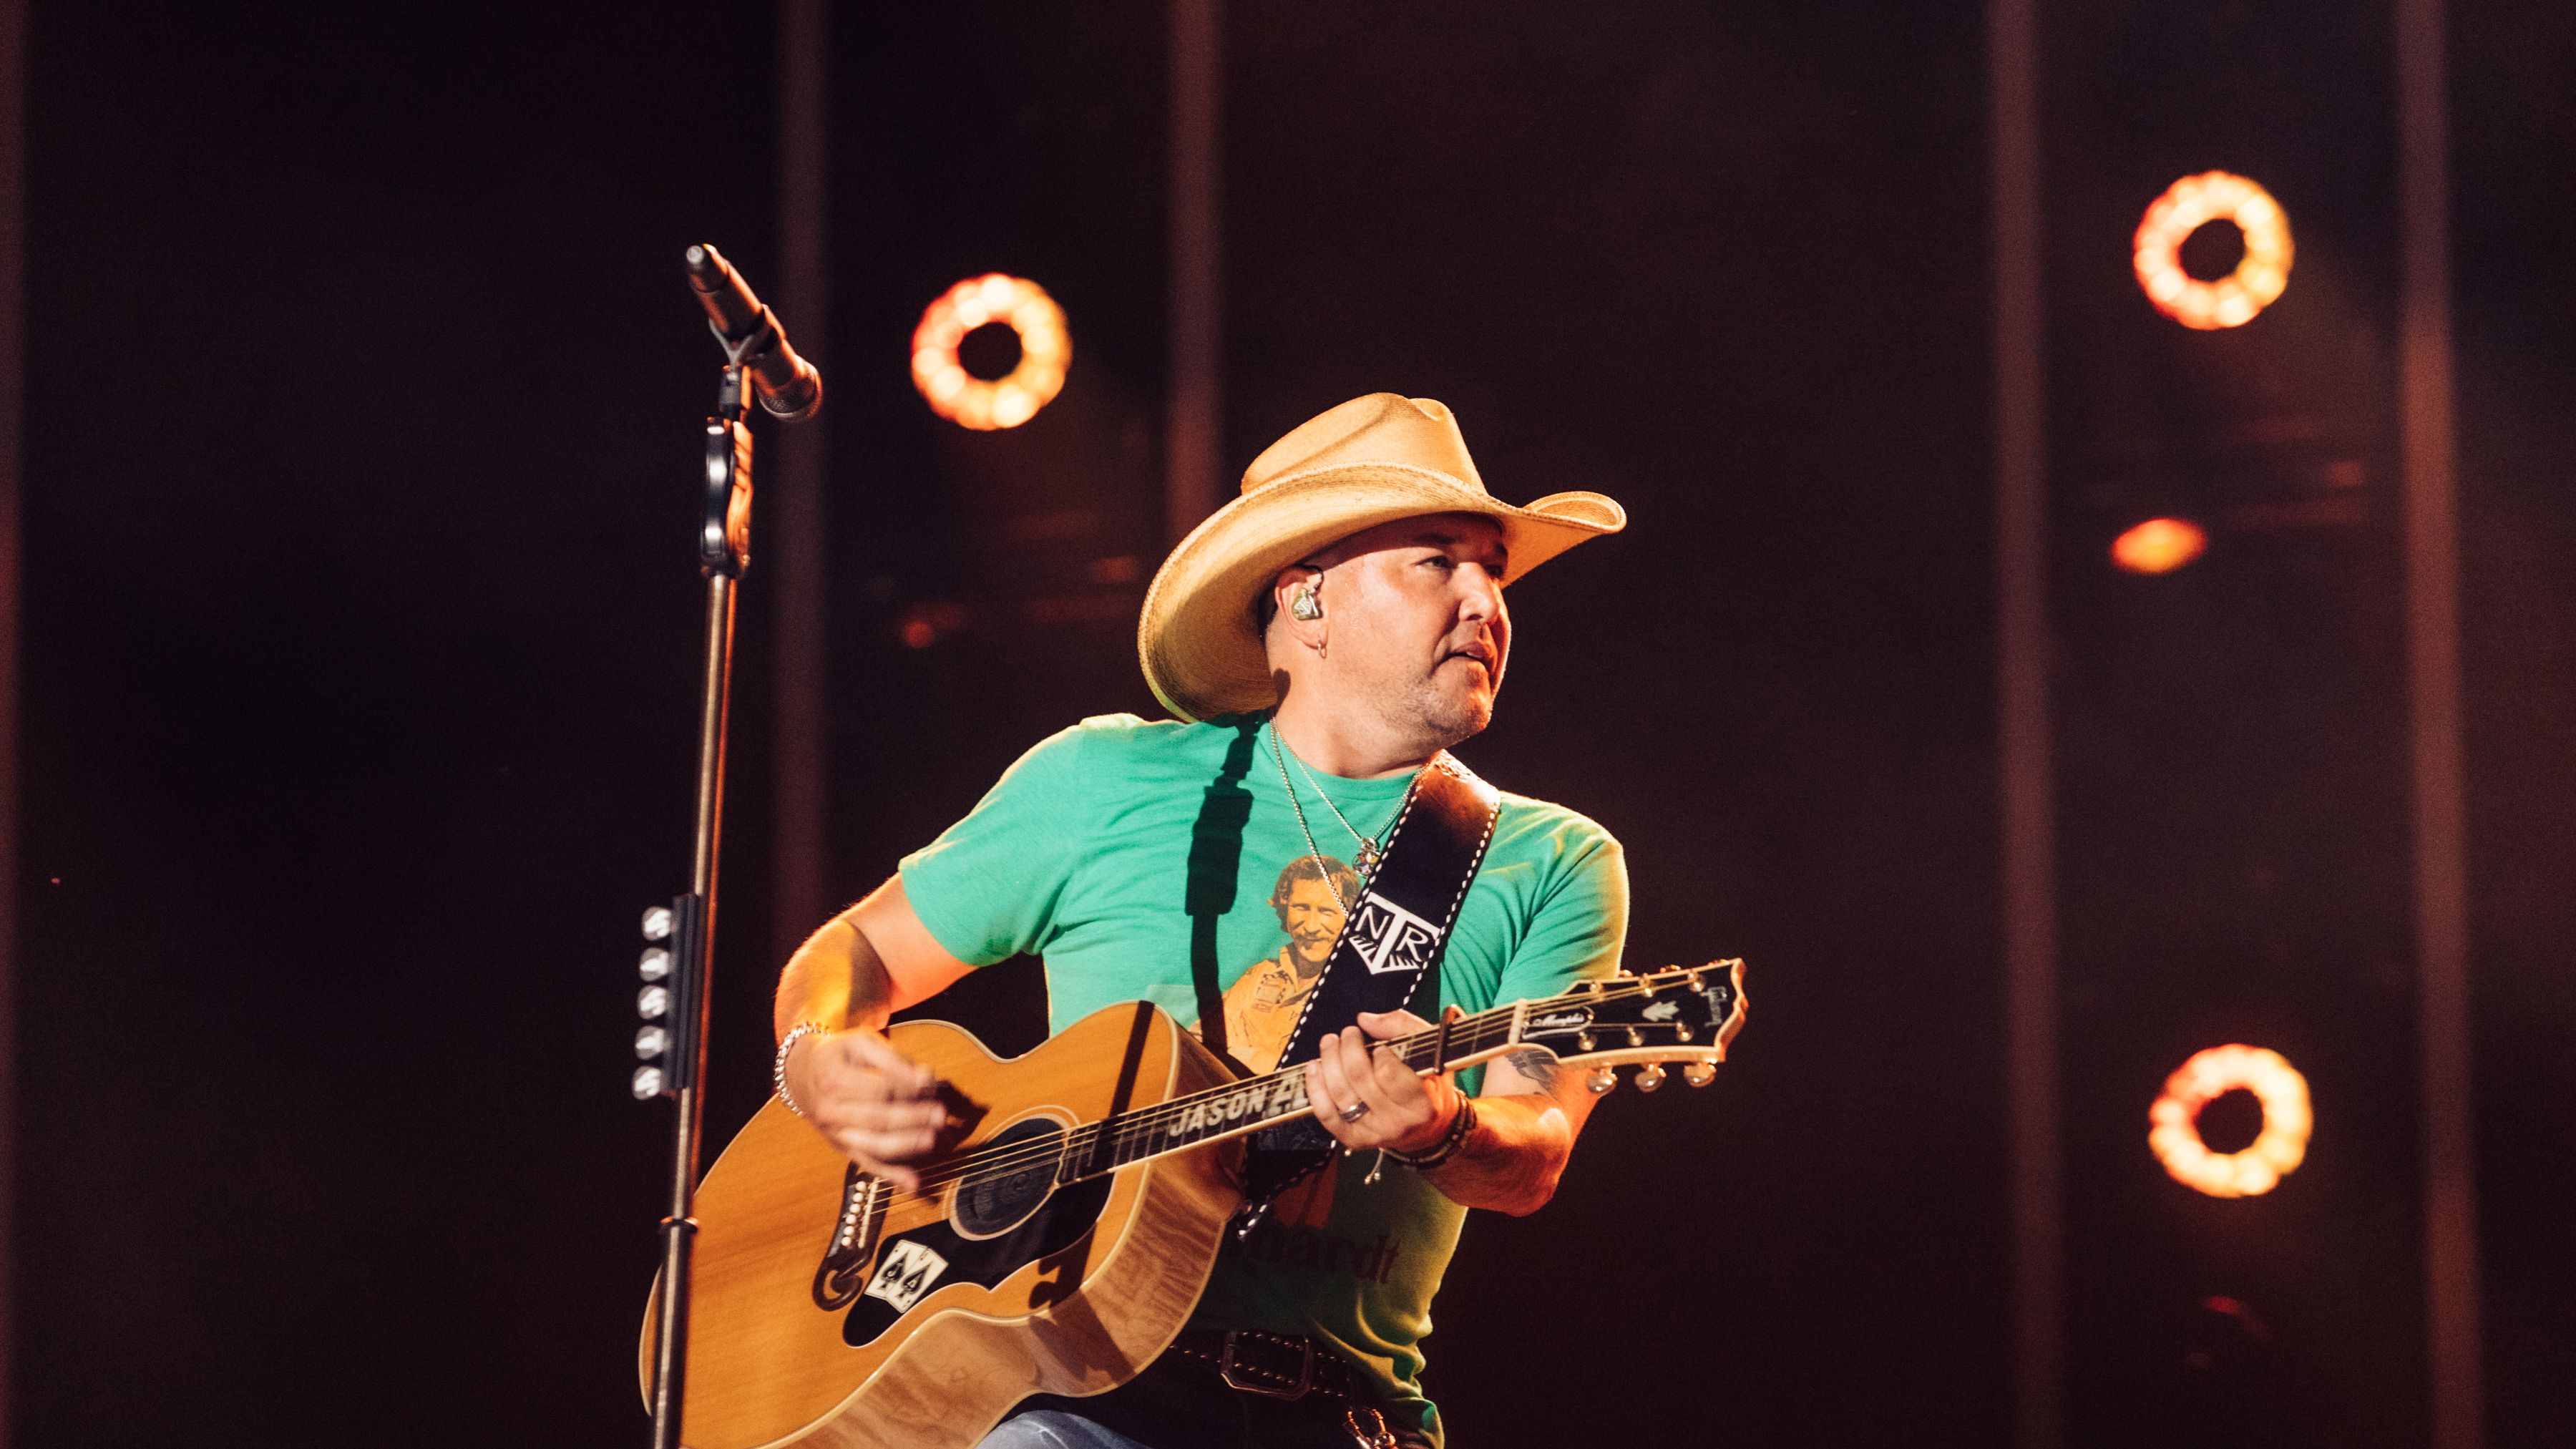 Lyrics for Rearview Town by Jason Aldean - Songfacts